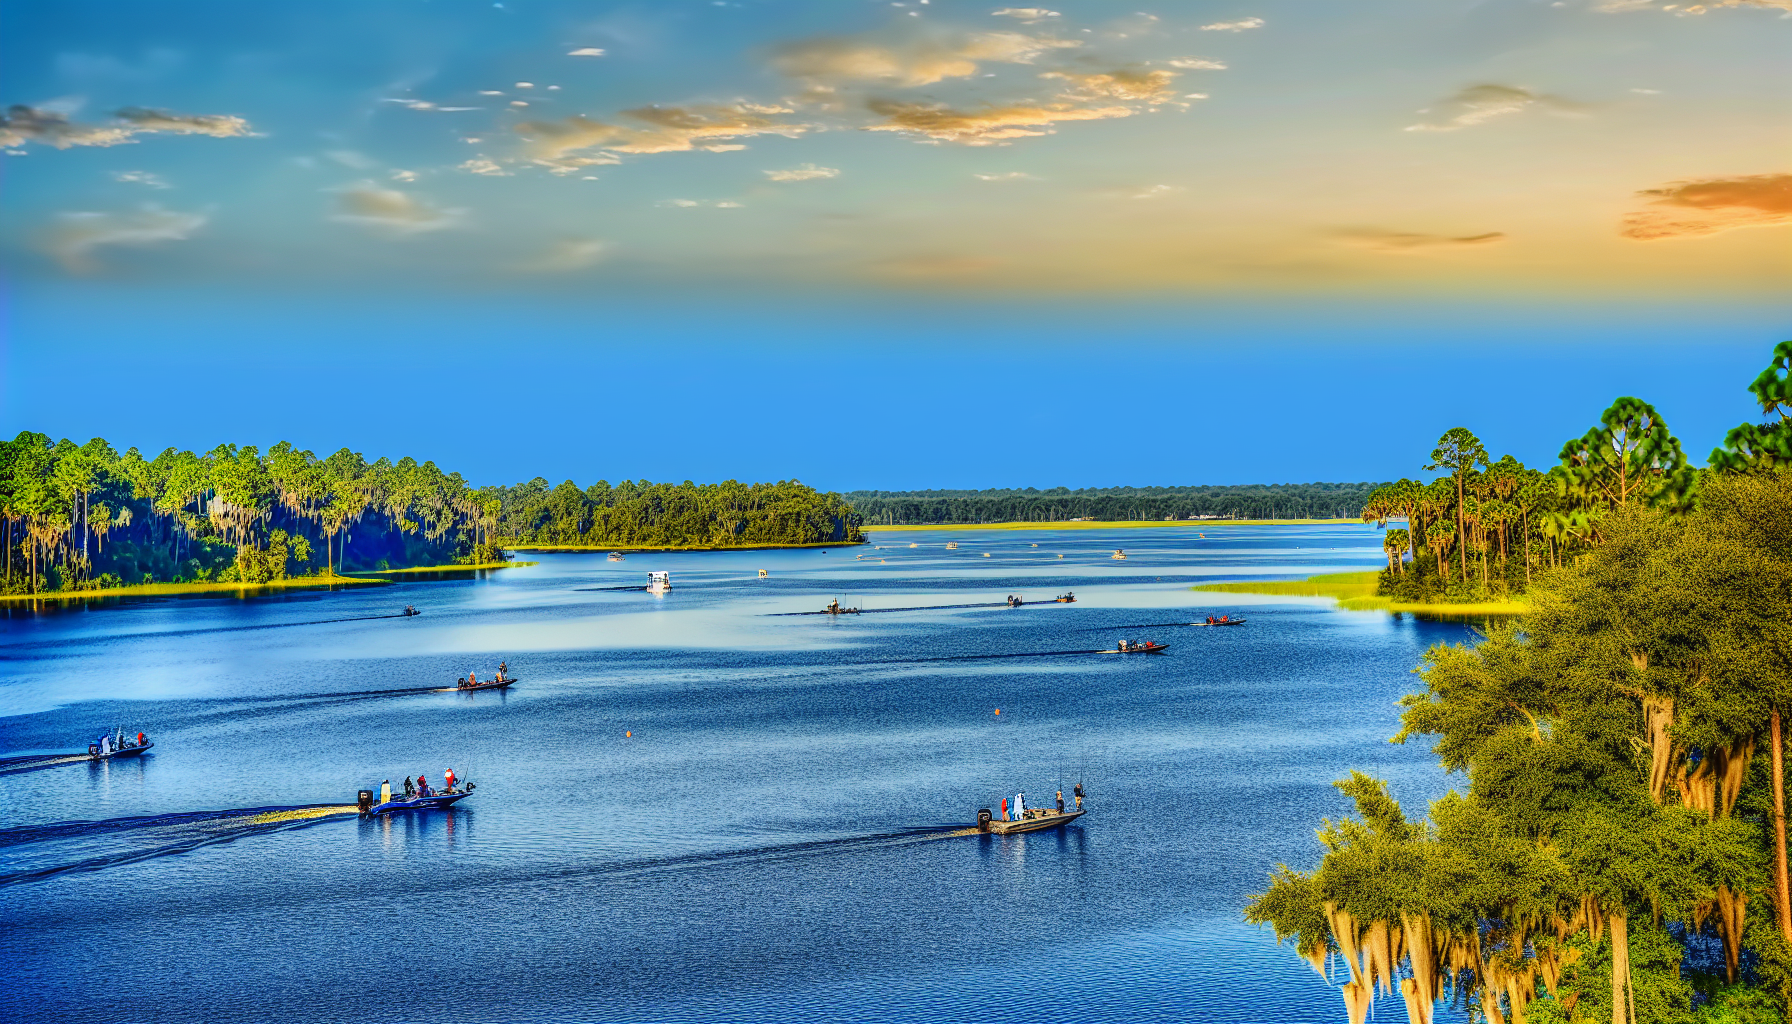 A scenic view of Lake Toho, a renowned bass fishing destination in Central Florida